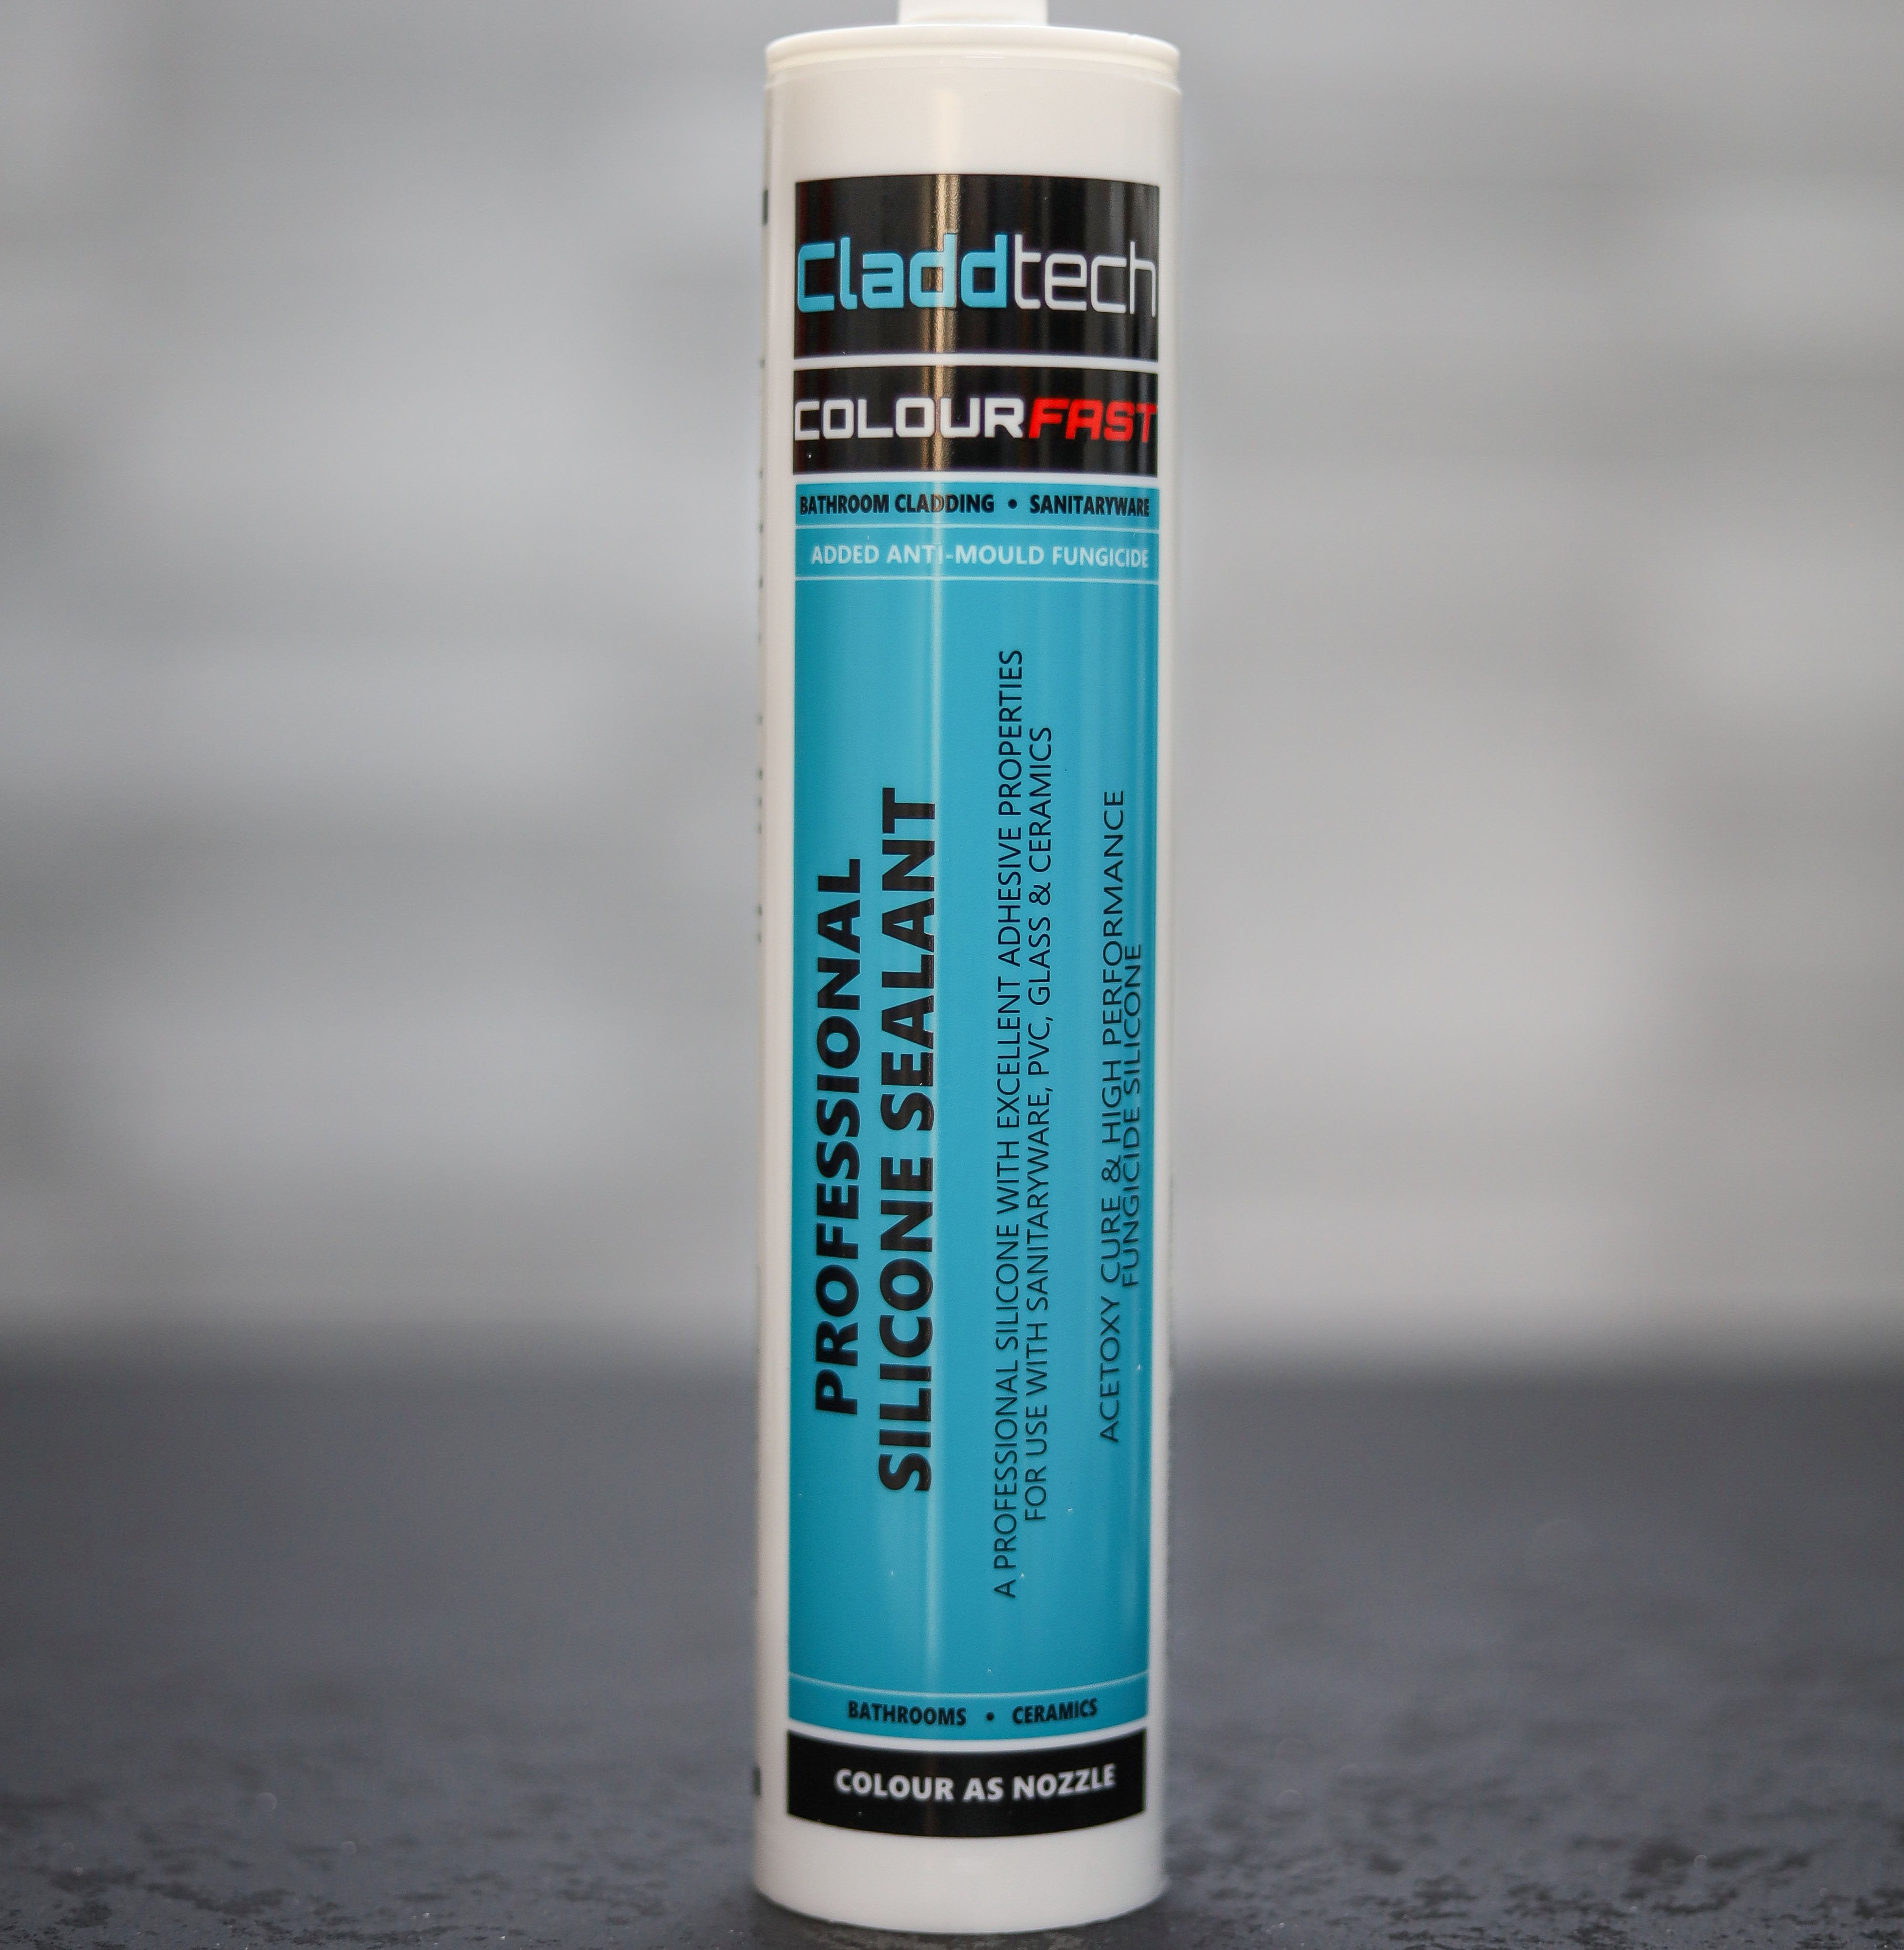 Grey Adhesive & Sealant Combined for Cladding Panel Installations - CladdTech